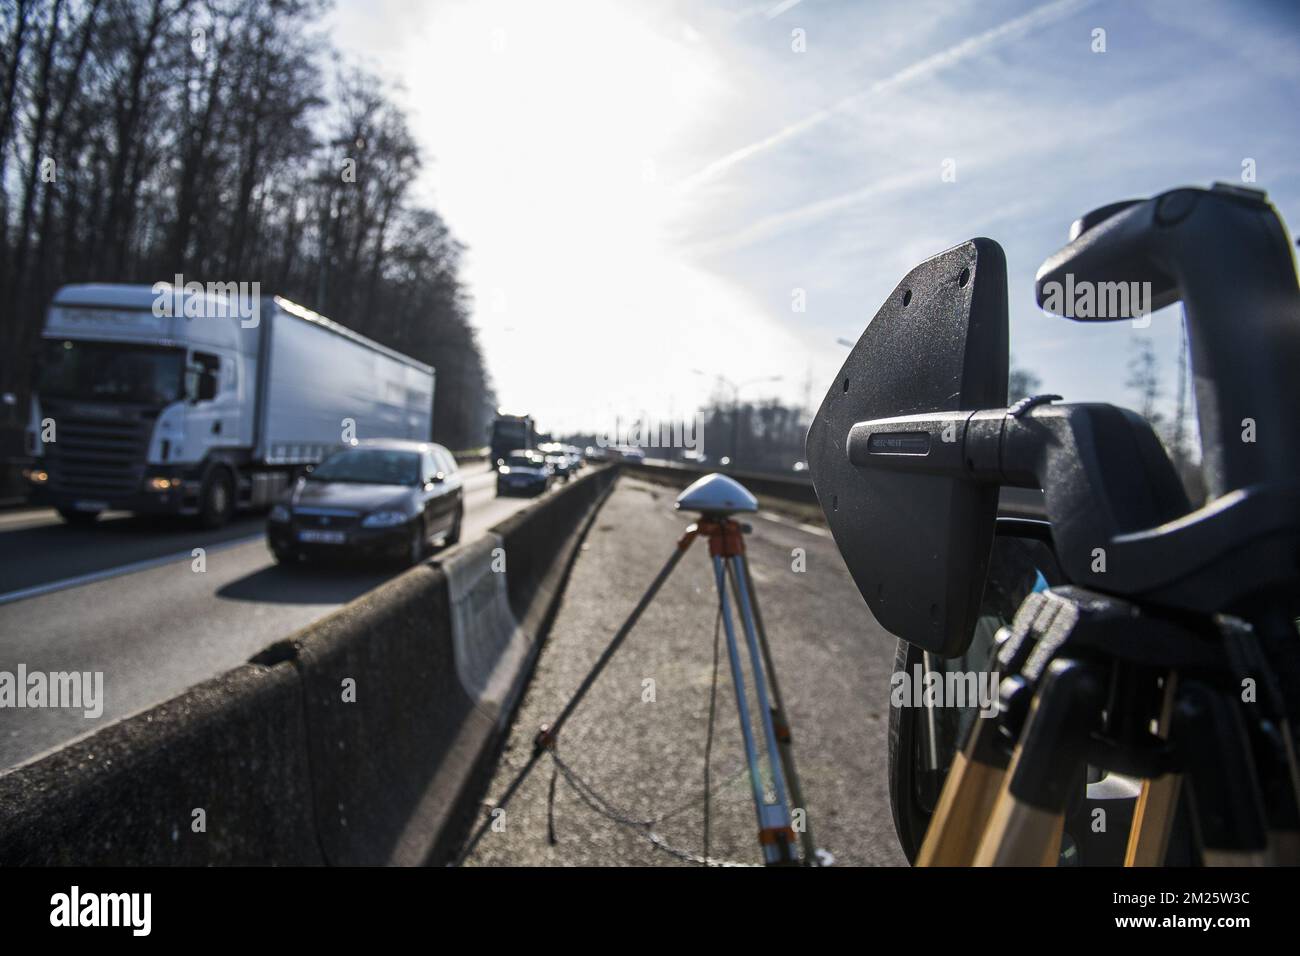 Illustration picture shows a control on fraud on the kilometer tax by Viapass, the government organization that monitors and controls the kilometer tax, Tuesday 14 March 2017, at Carrefour Leonard - Leonardkruispunt in Brussels. On 01 April 216, the Flemish, Walloon and Brussels Capital regions introduced a kilometer tax for trucks weighting more than 3.5 tons. Belgian and foreign trucks must have an OBU, On Board Unit, when driving on public roads in Belgium. BELGA PHOTO LAURIE DIEFFEMBACQ  Stock Photo